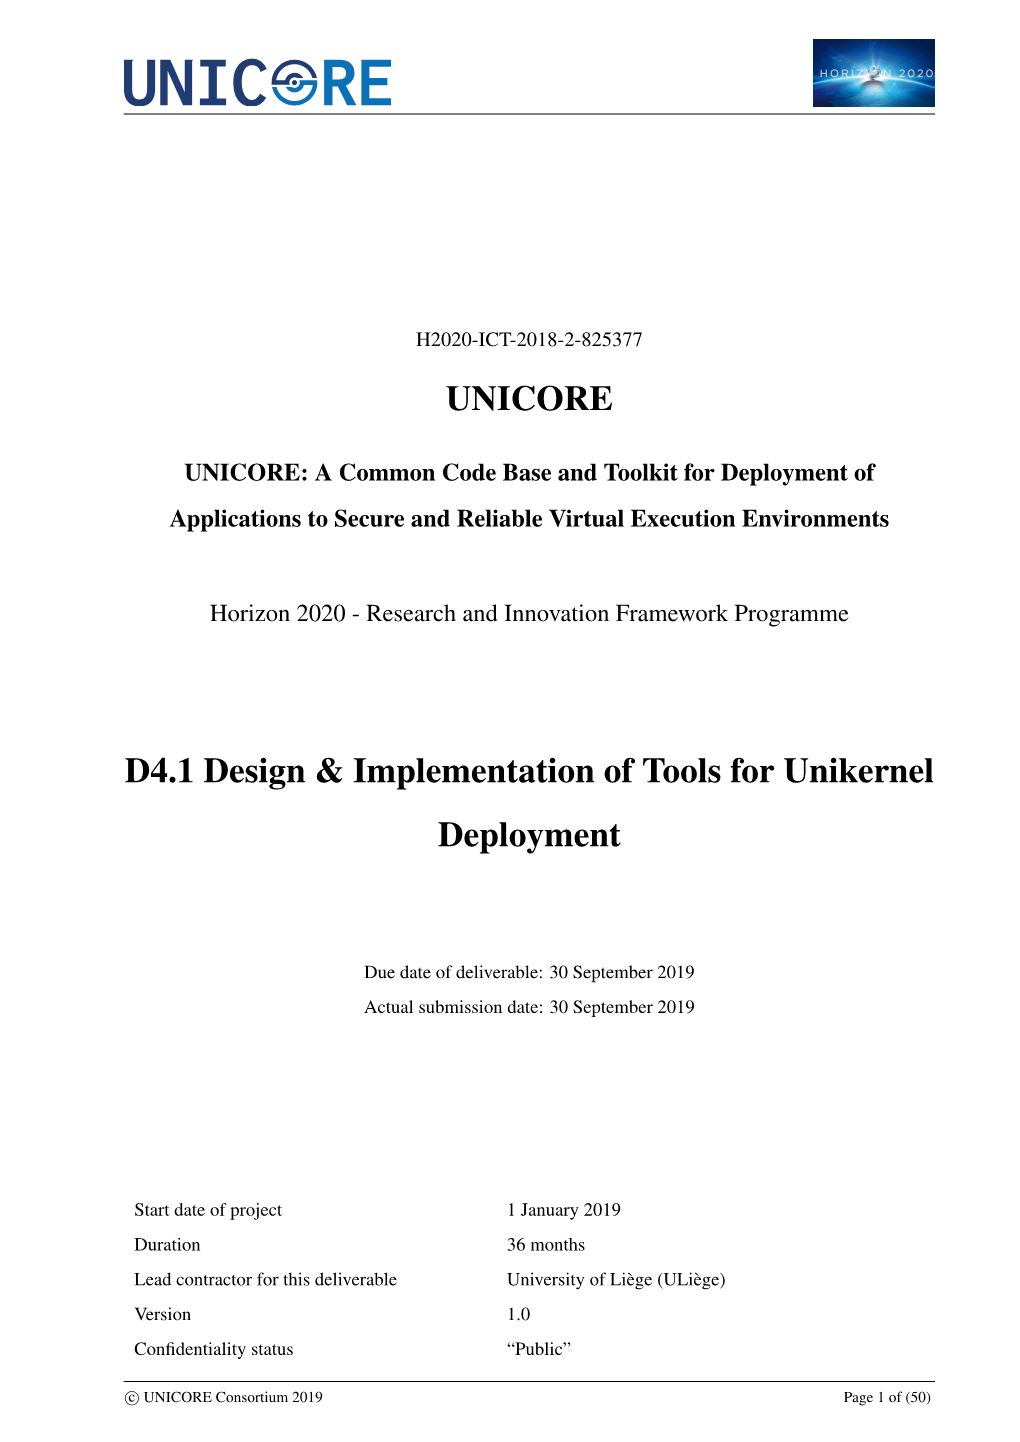 UNICORE D4.1 Design & Implementation of Tools For